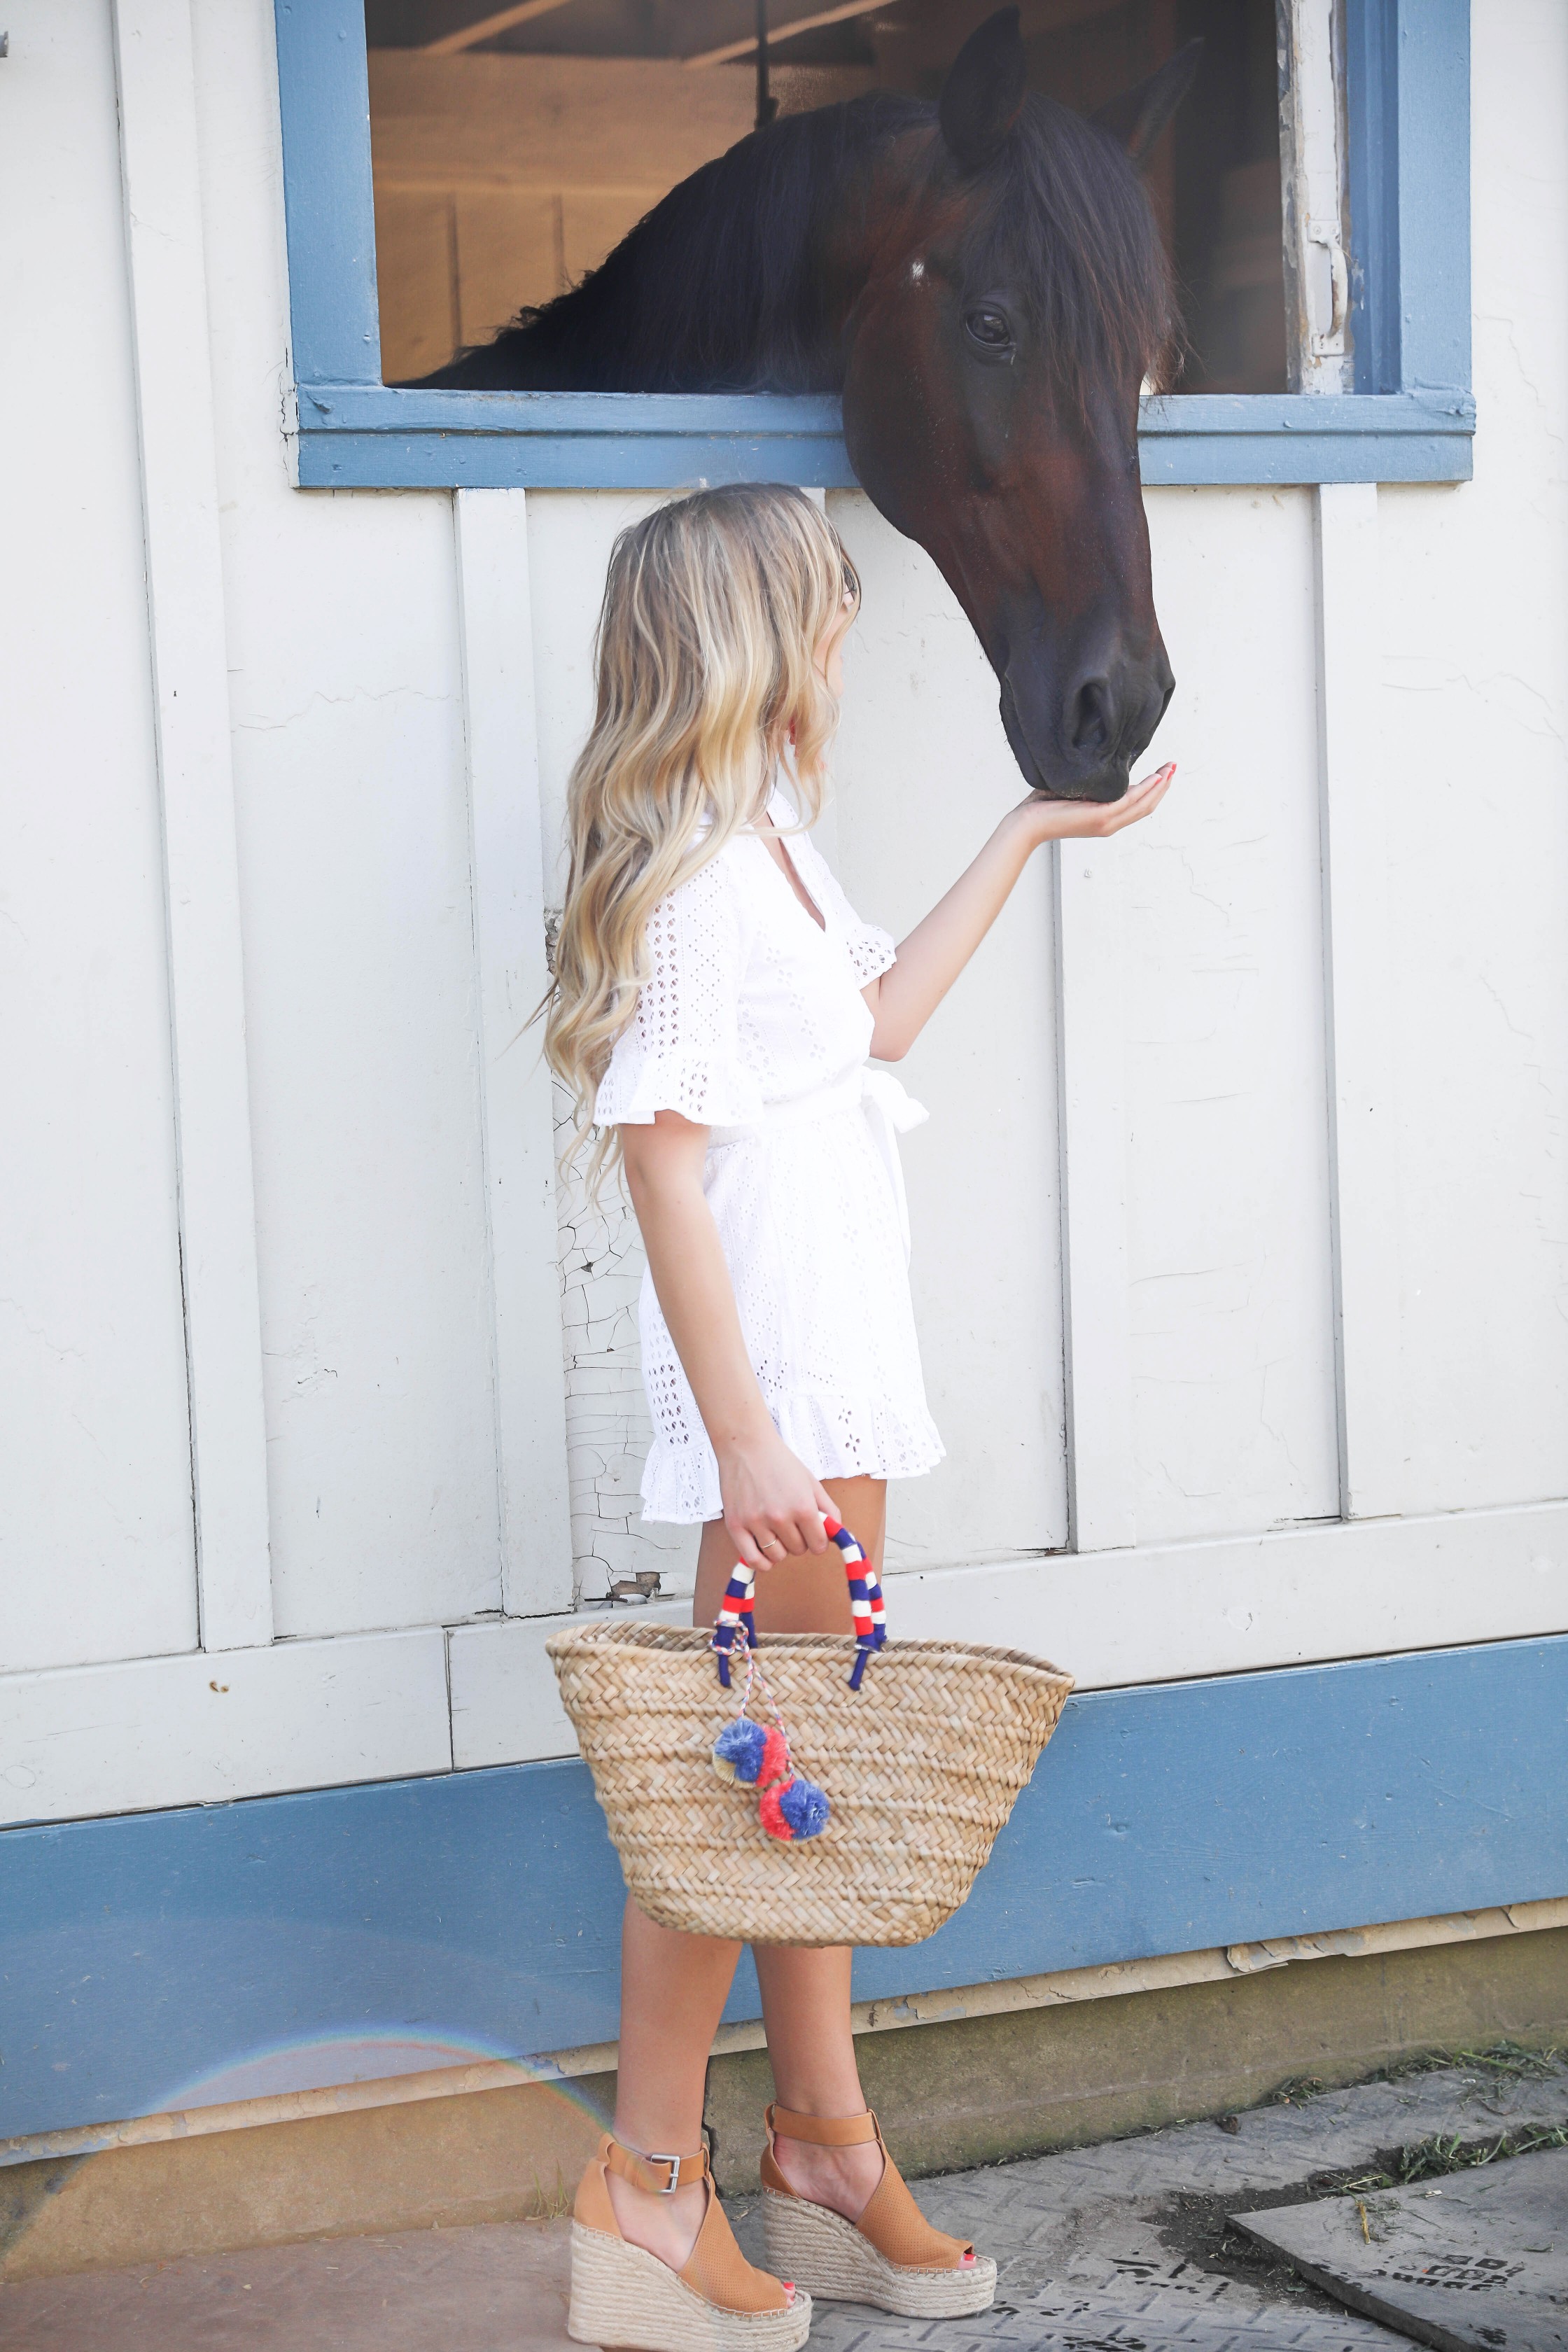 White ruffle tied romper perfect for dressing up or dressing down! Paired with a cute straw beach bag for fourth of july! The beach bag has red white and blue pom poms on it! I finished the fourth of july outfit with red tassel earrings and my favorite wedges! Details on fashion blog daily dose of charm by lauren lindmark